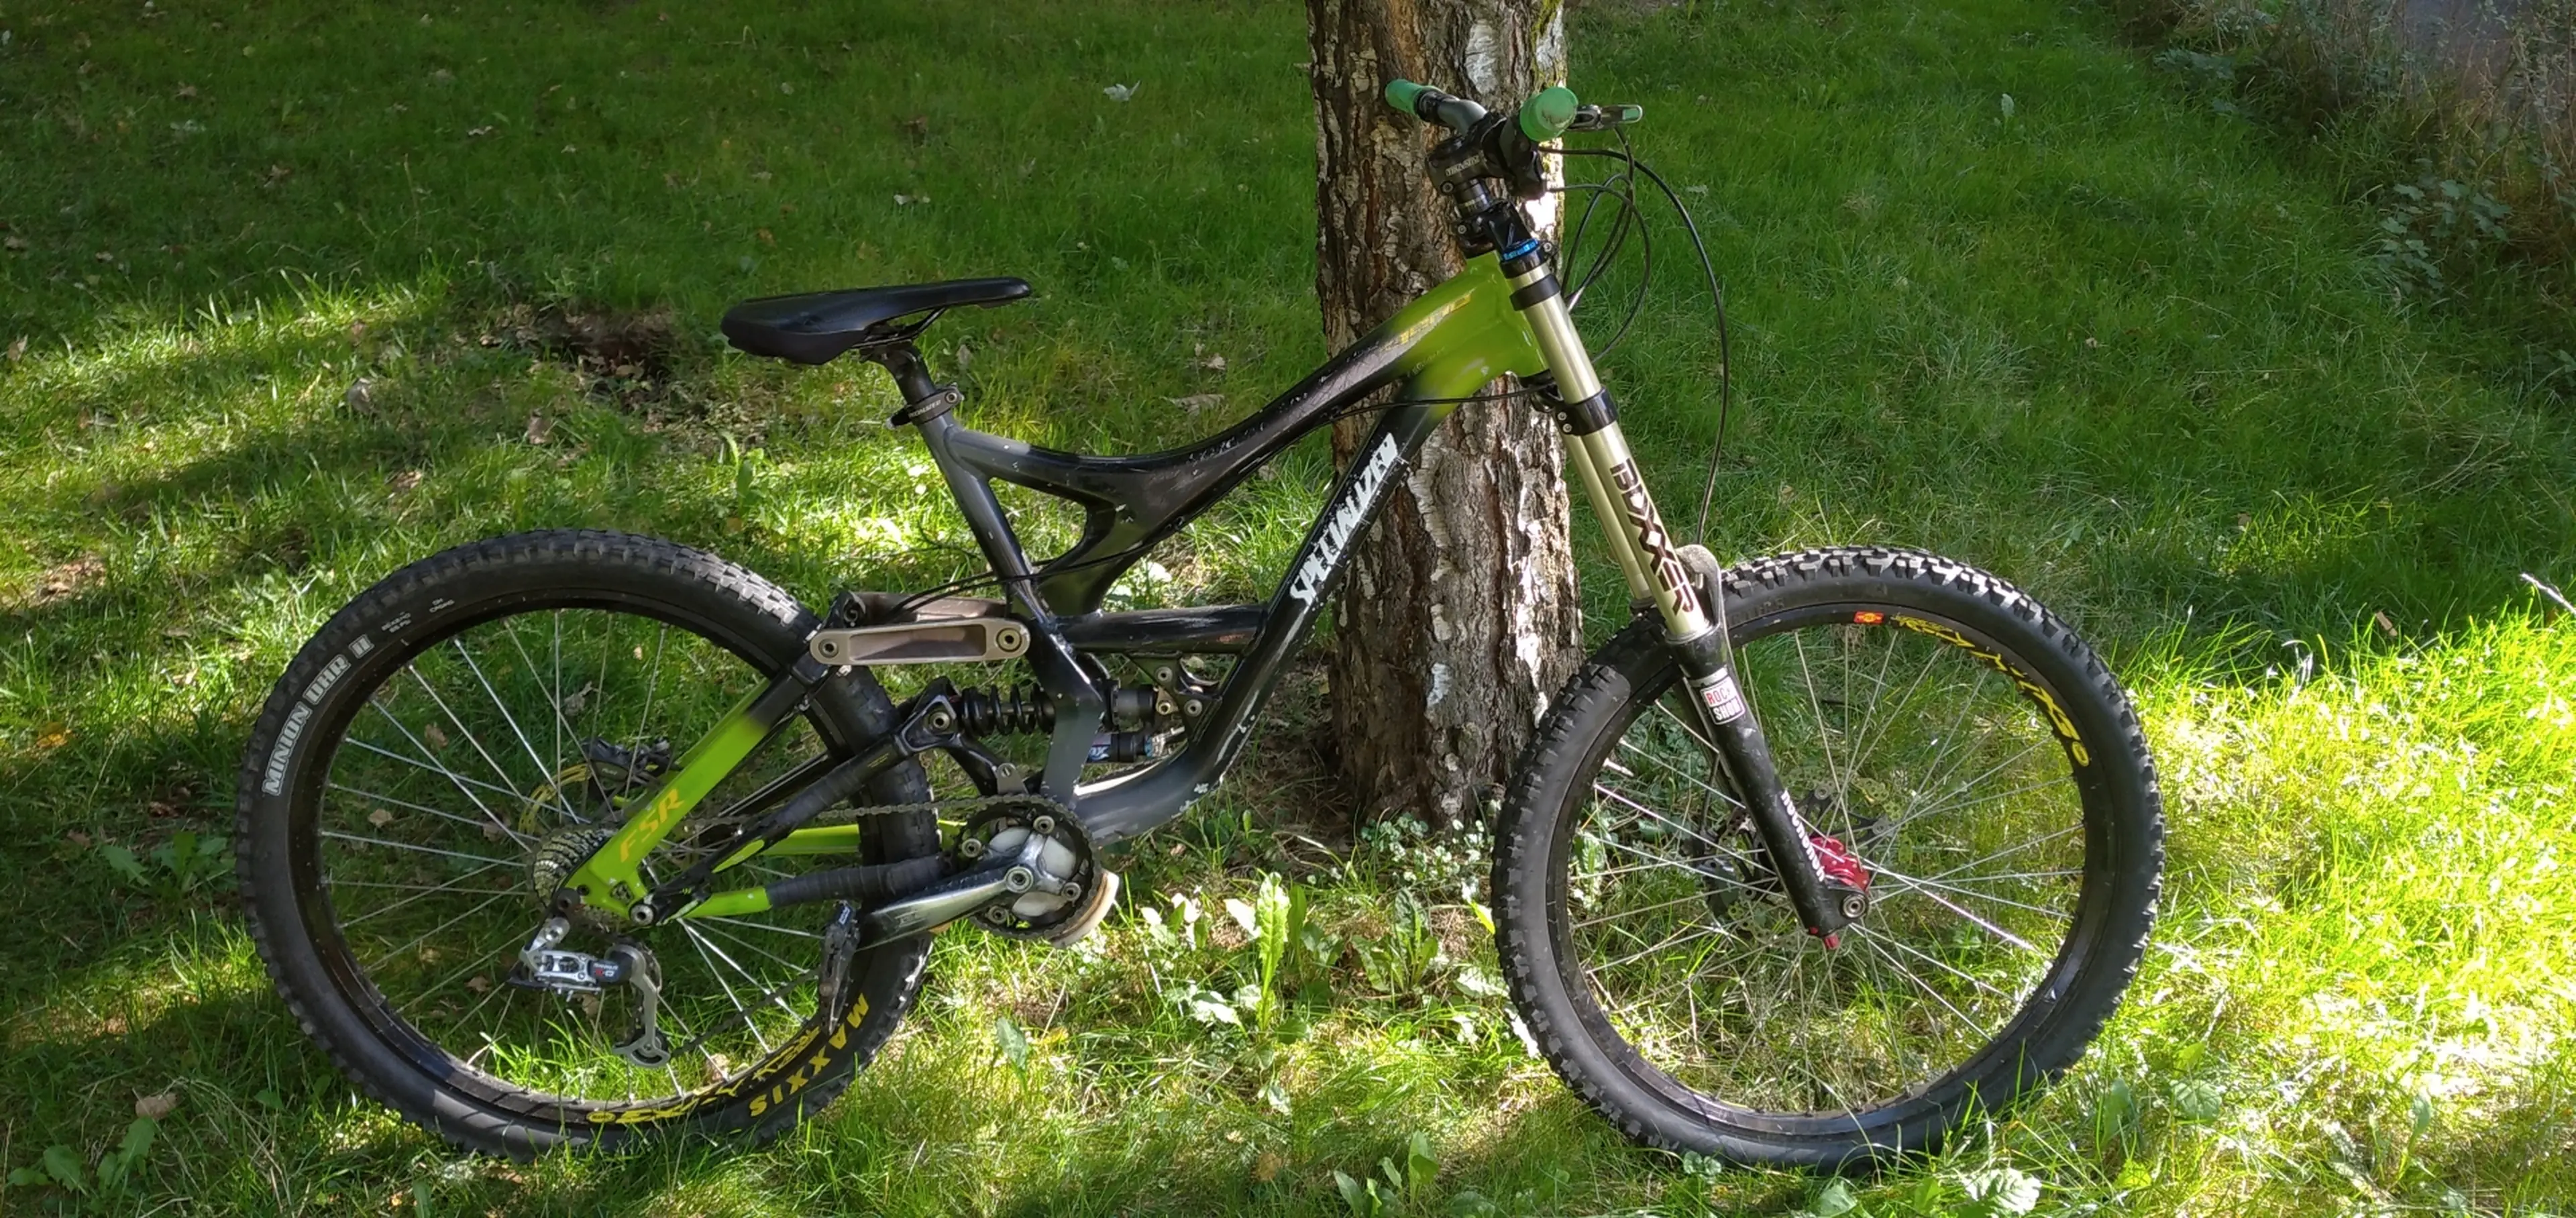 6. Vand MTB Specialized Demo 7